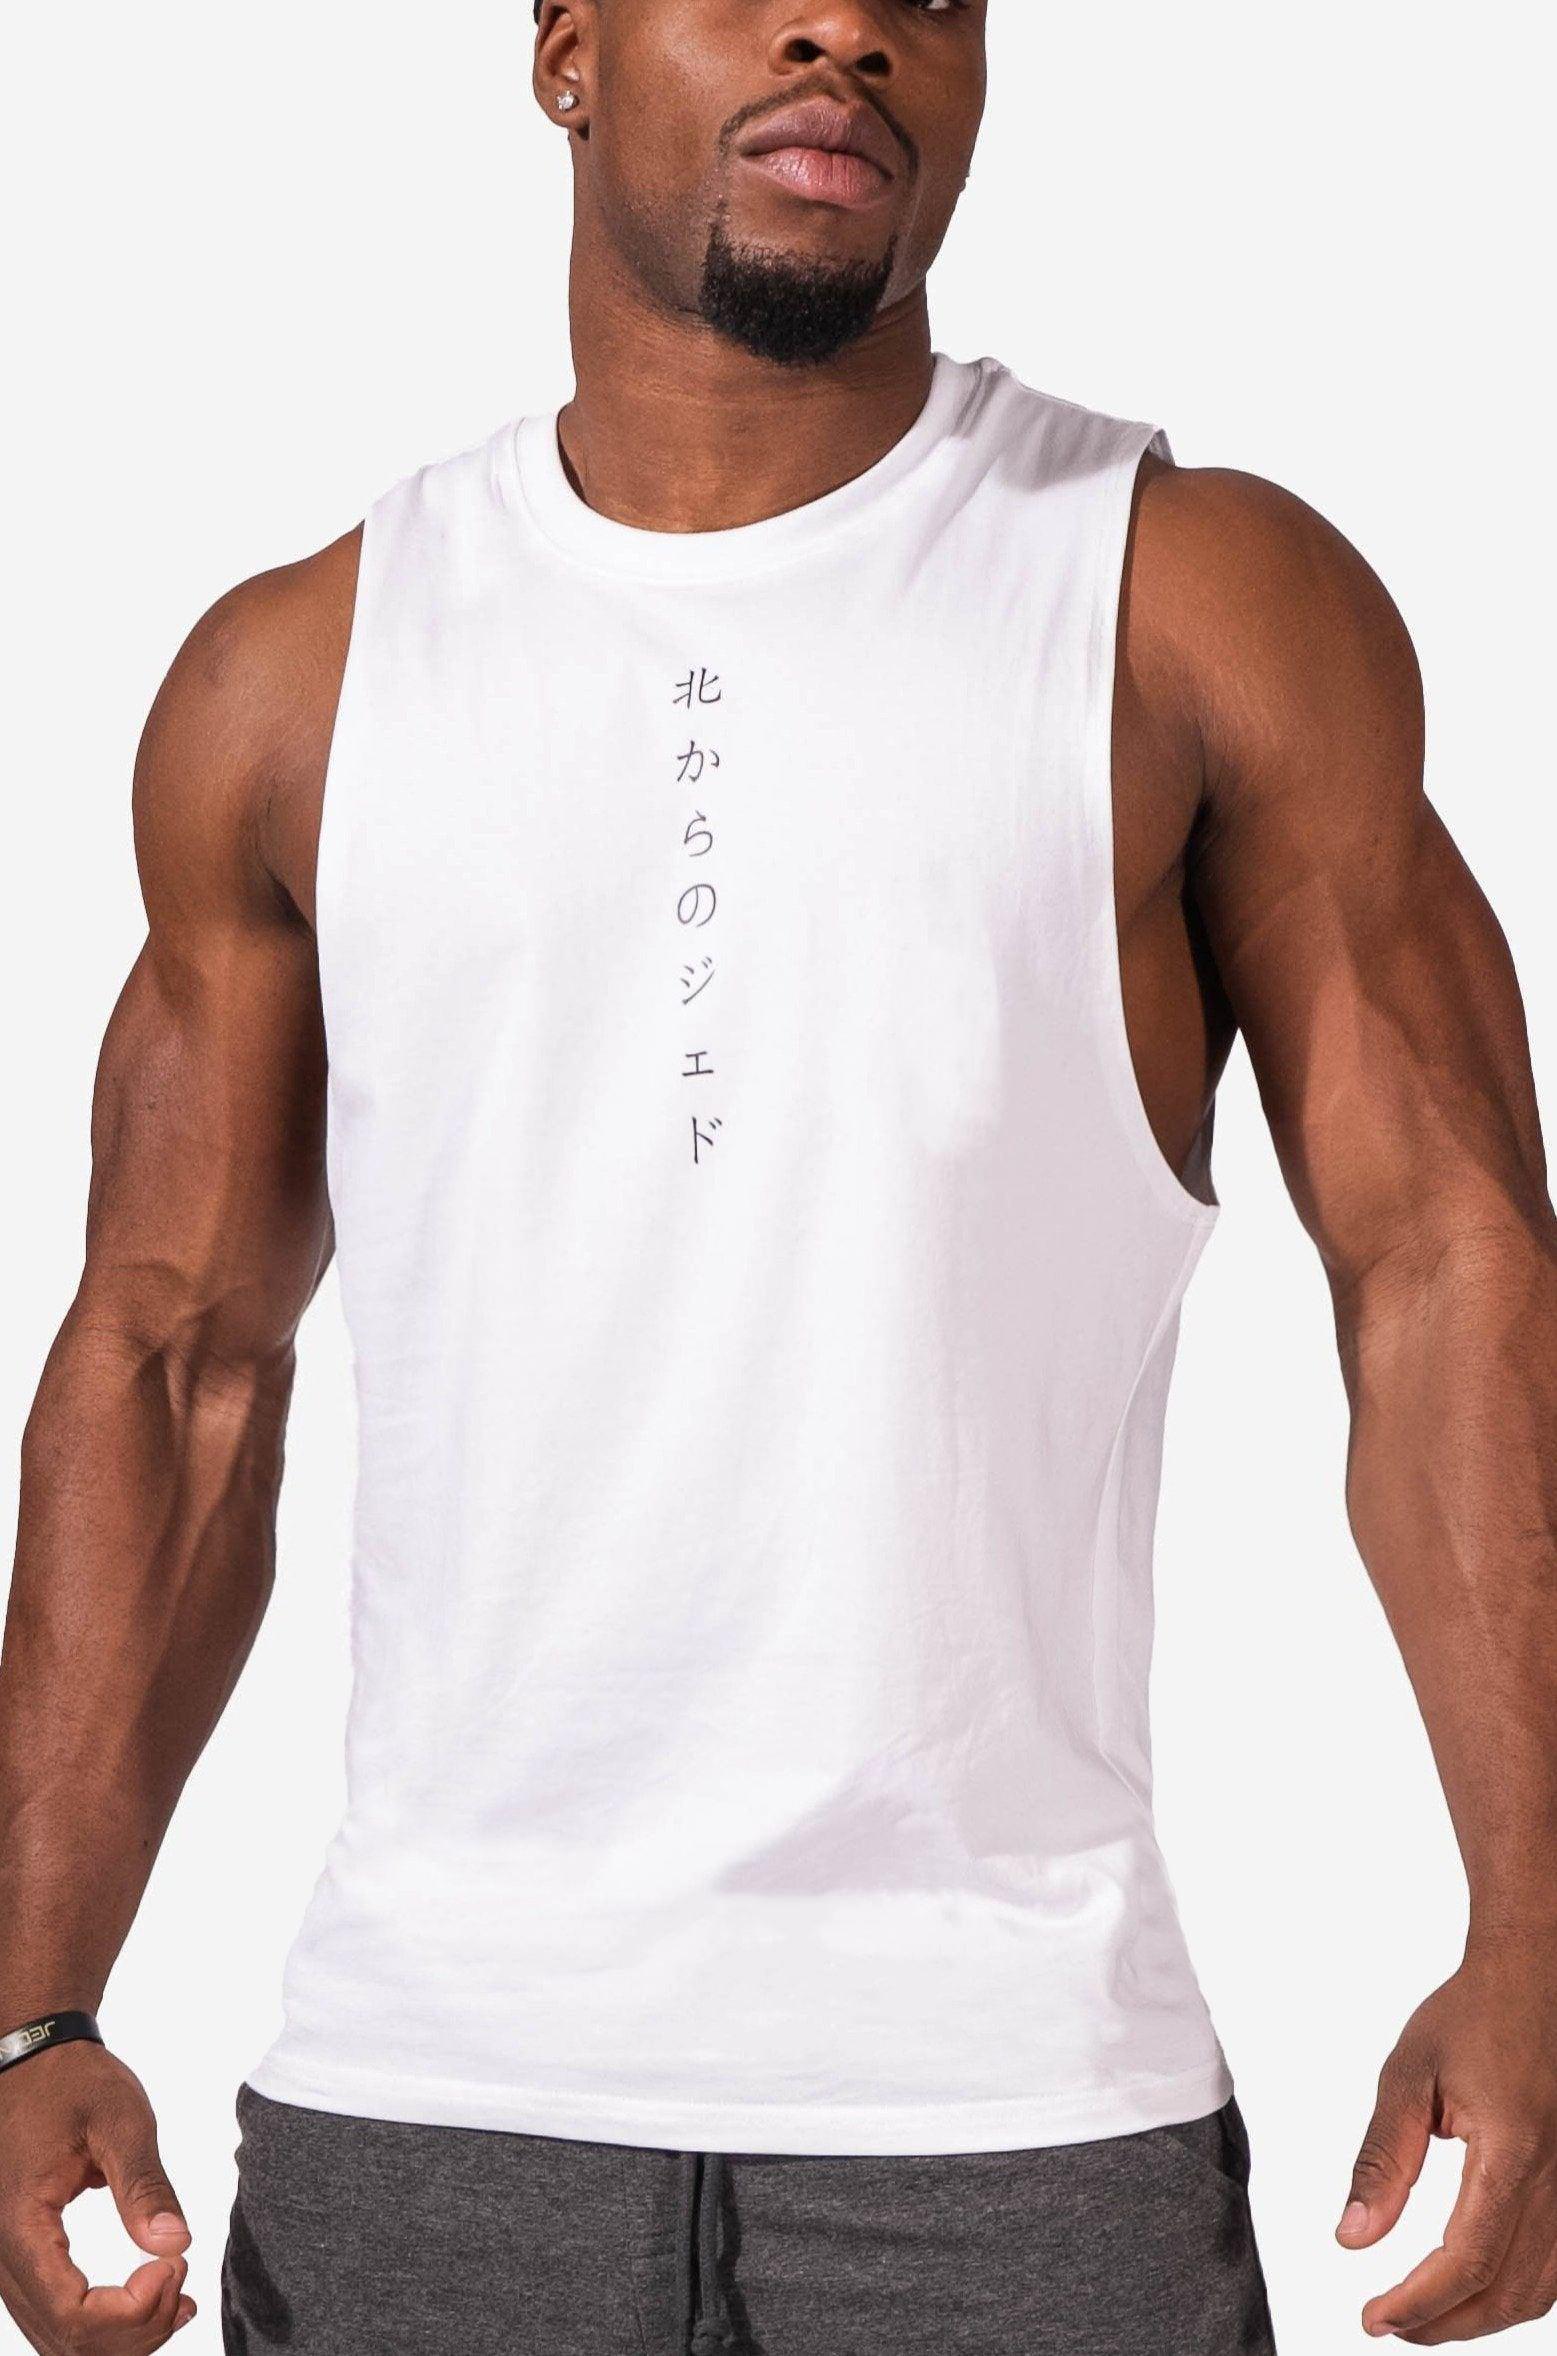 Men's Casual Breathable Tank Tops Gym Fitness Sports Sleeveless Tank  T-shirt Color:Gray Size:Asian L 